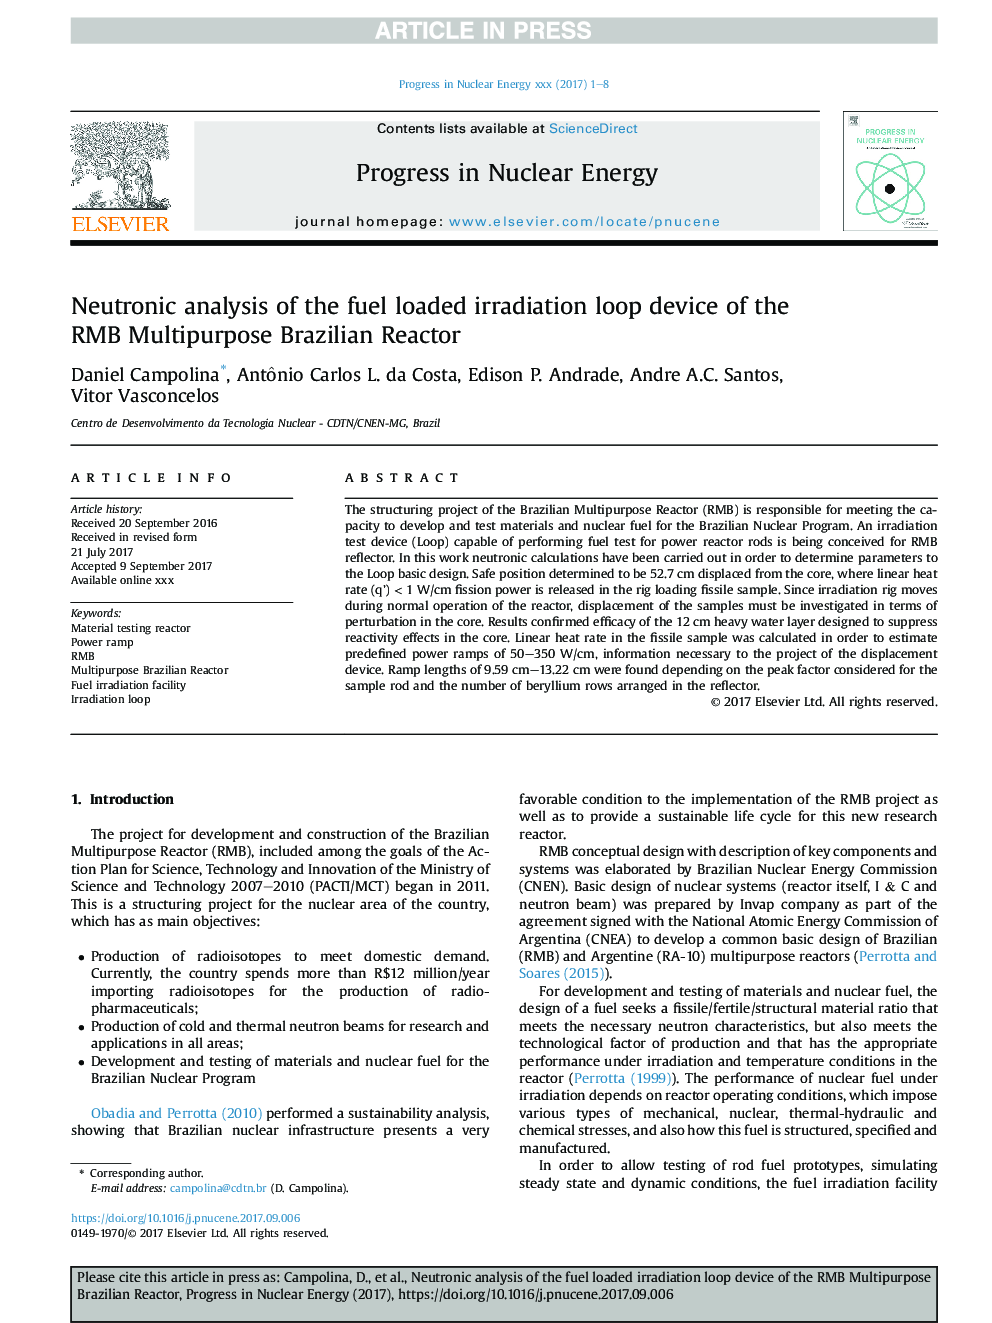 Neutronic analysis of the fuel loaded irradiation loop device of the RMB Multipurpose Brazilian Reactor